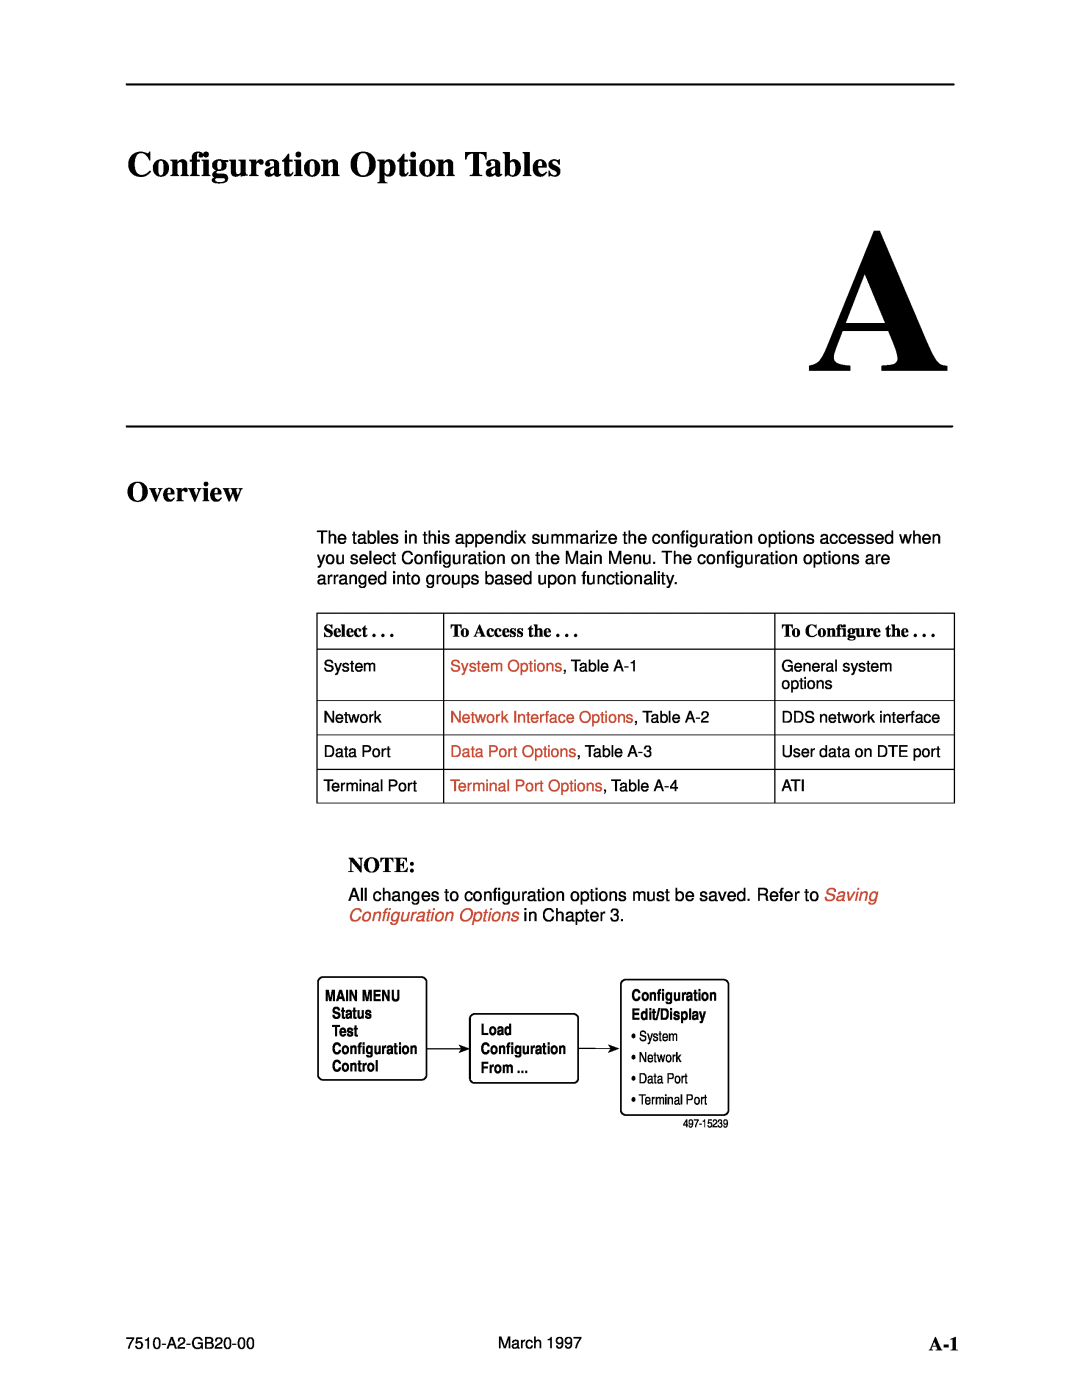 Paradyne 727 manual Configuration Option Tables, Overview, Configuration Options in Chapter 